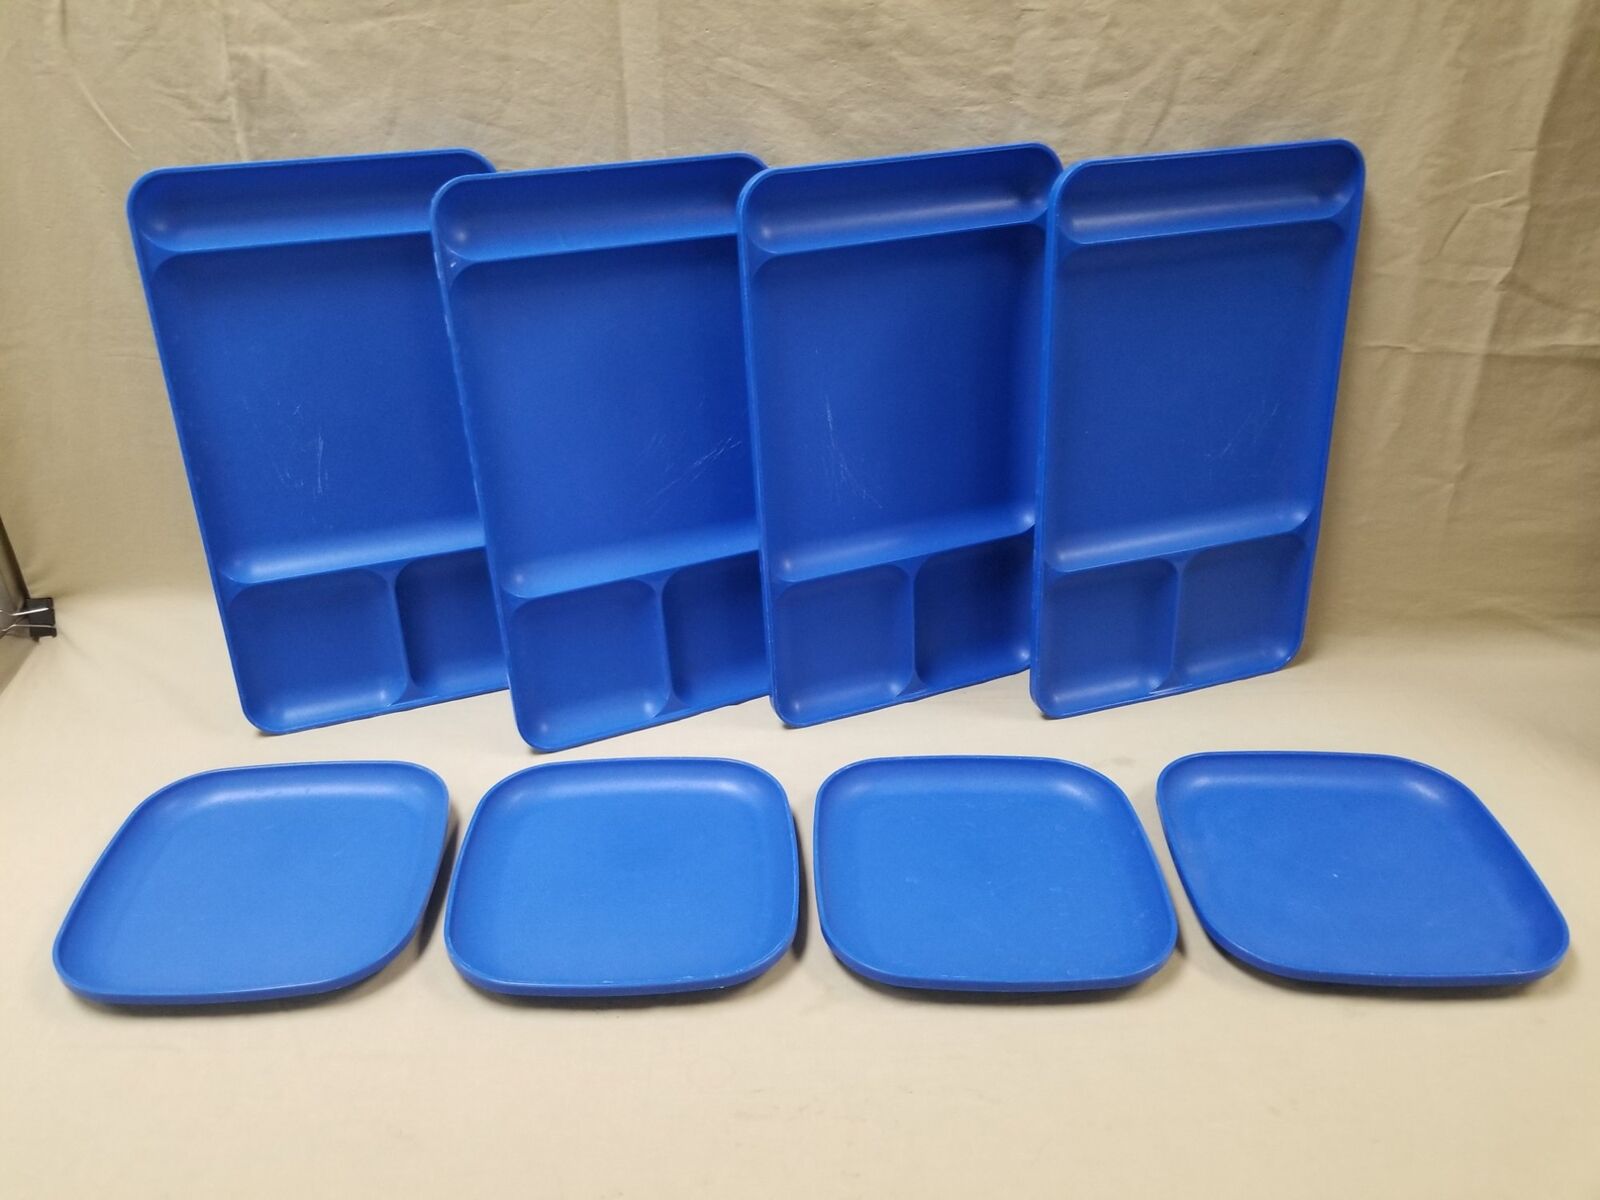 8pc Lot of Tupperware Blue Plastic 1535-3 Lunch Trays & 1534-17 Square Plates